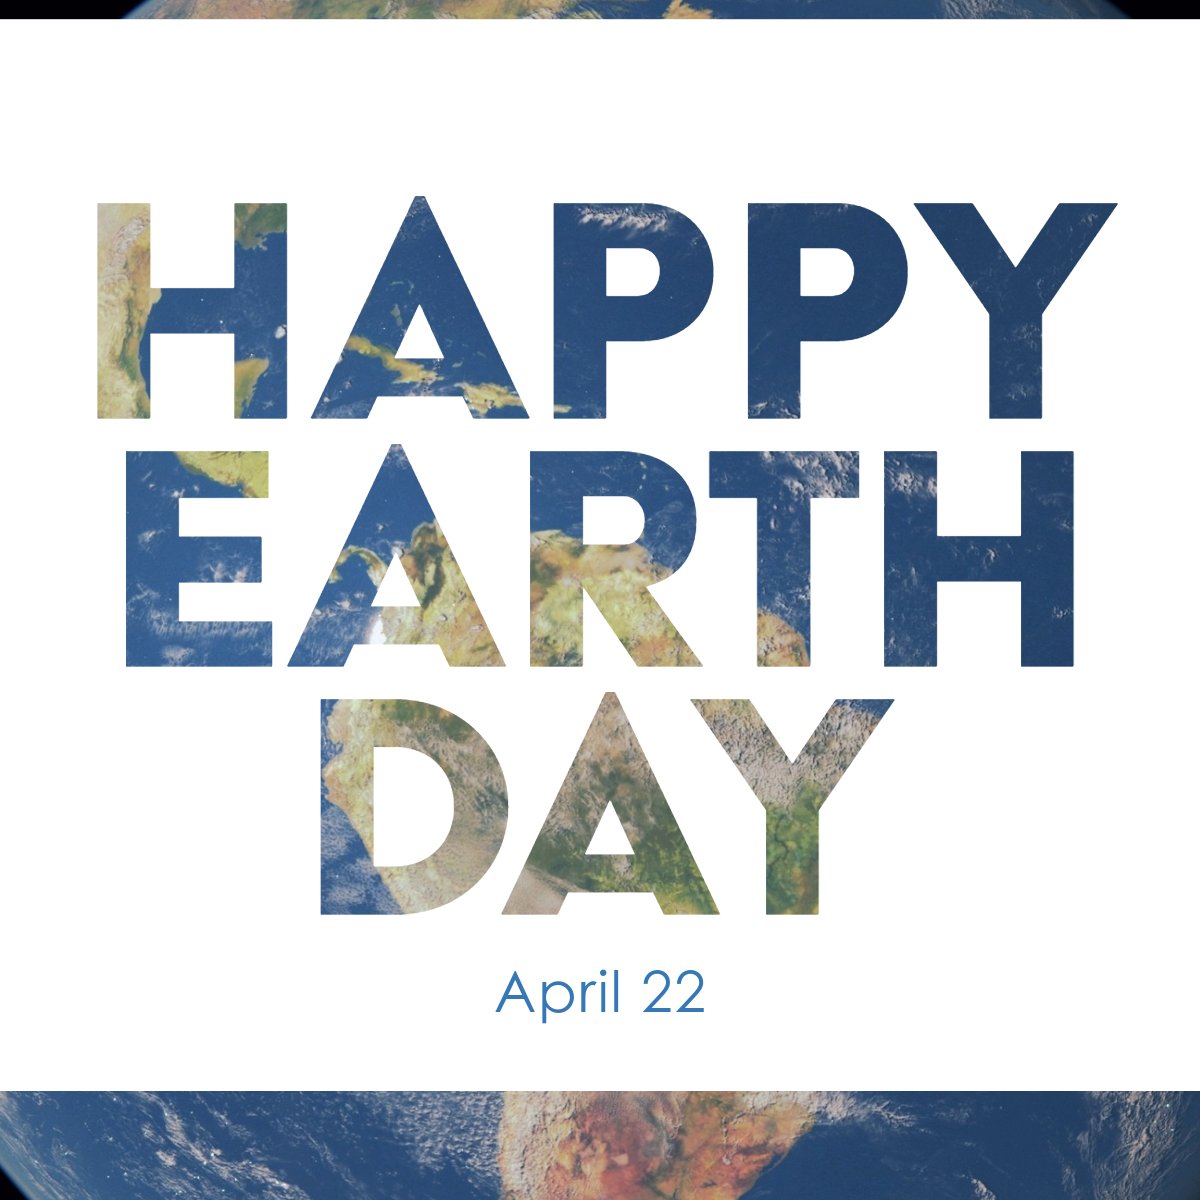 Earth Day is a reminder that every action, no matter how small, can make a big impact on our planet. At Kentwood Office, we're committed to reducing our environmental footprint and promoting sustainable practices. #EarthDay #Sustainability #KentwoodCares